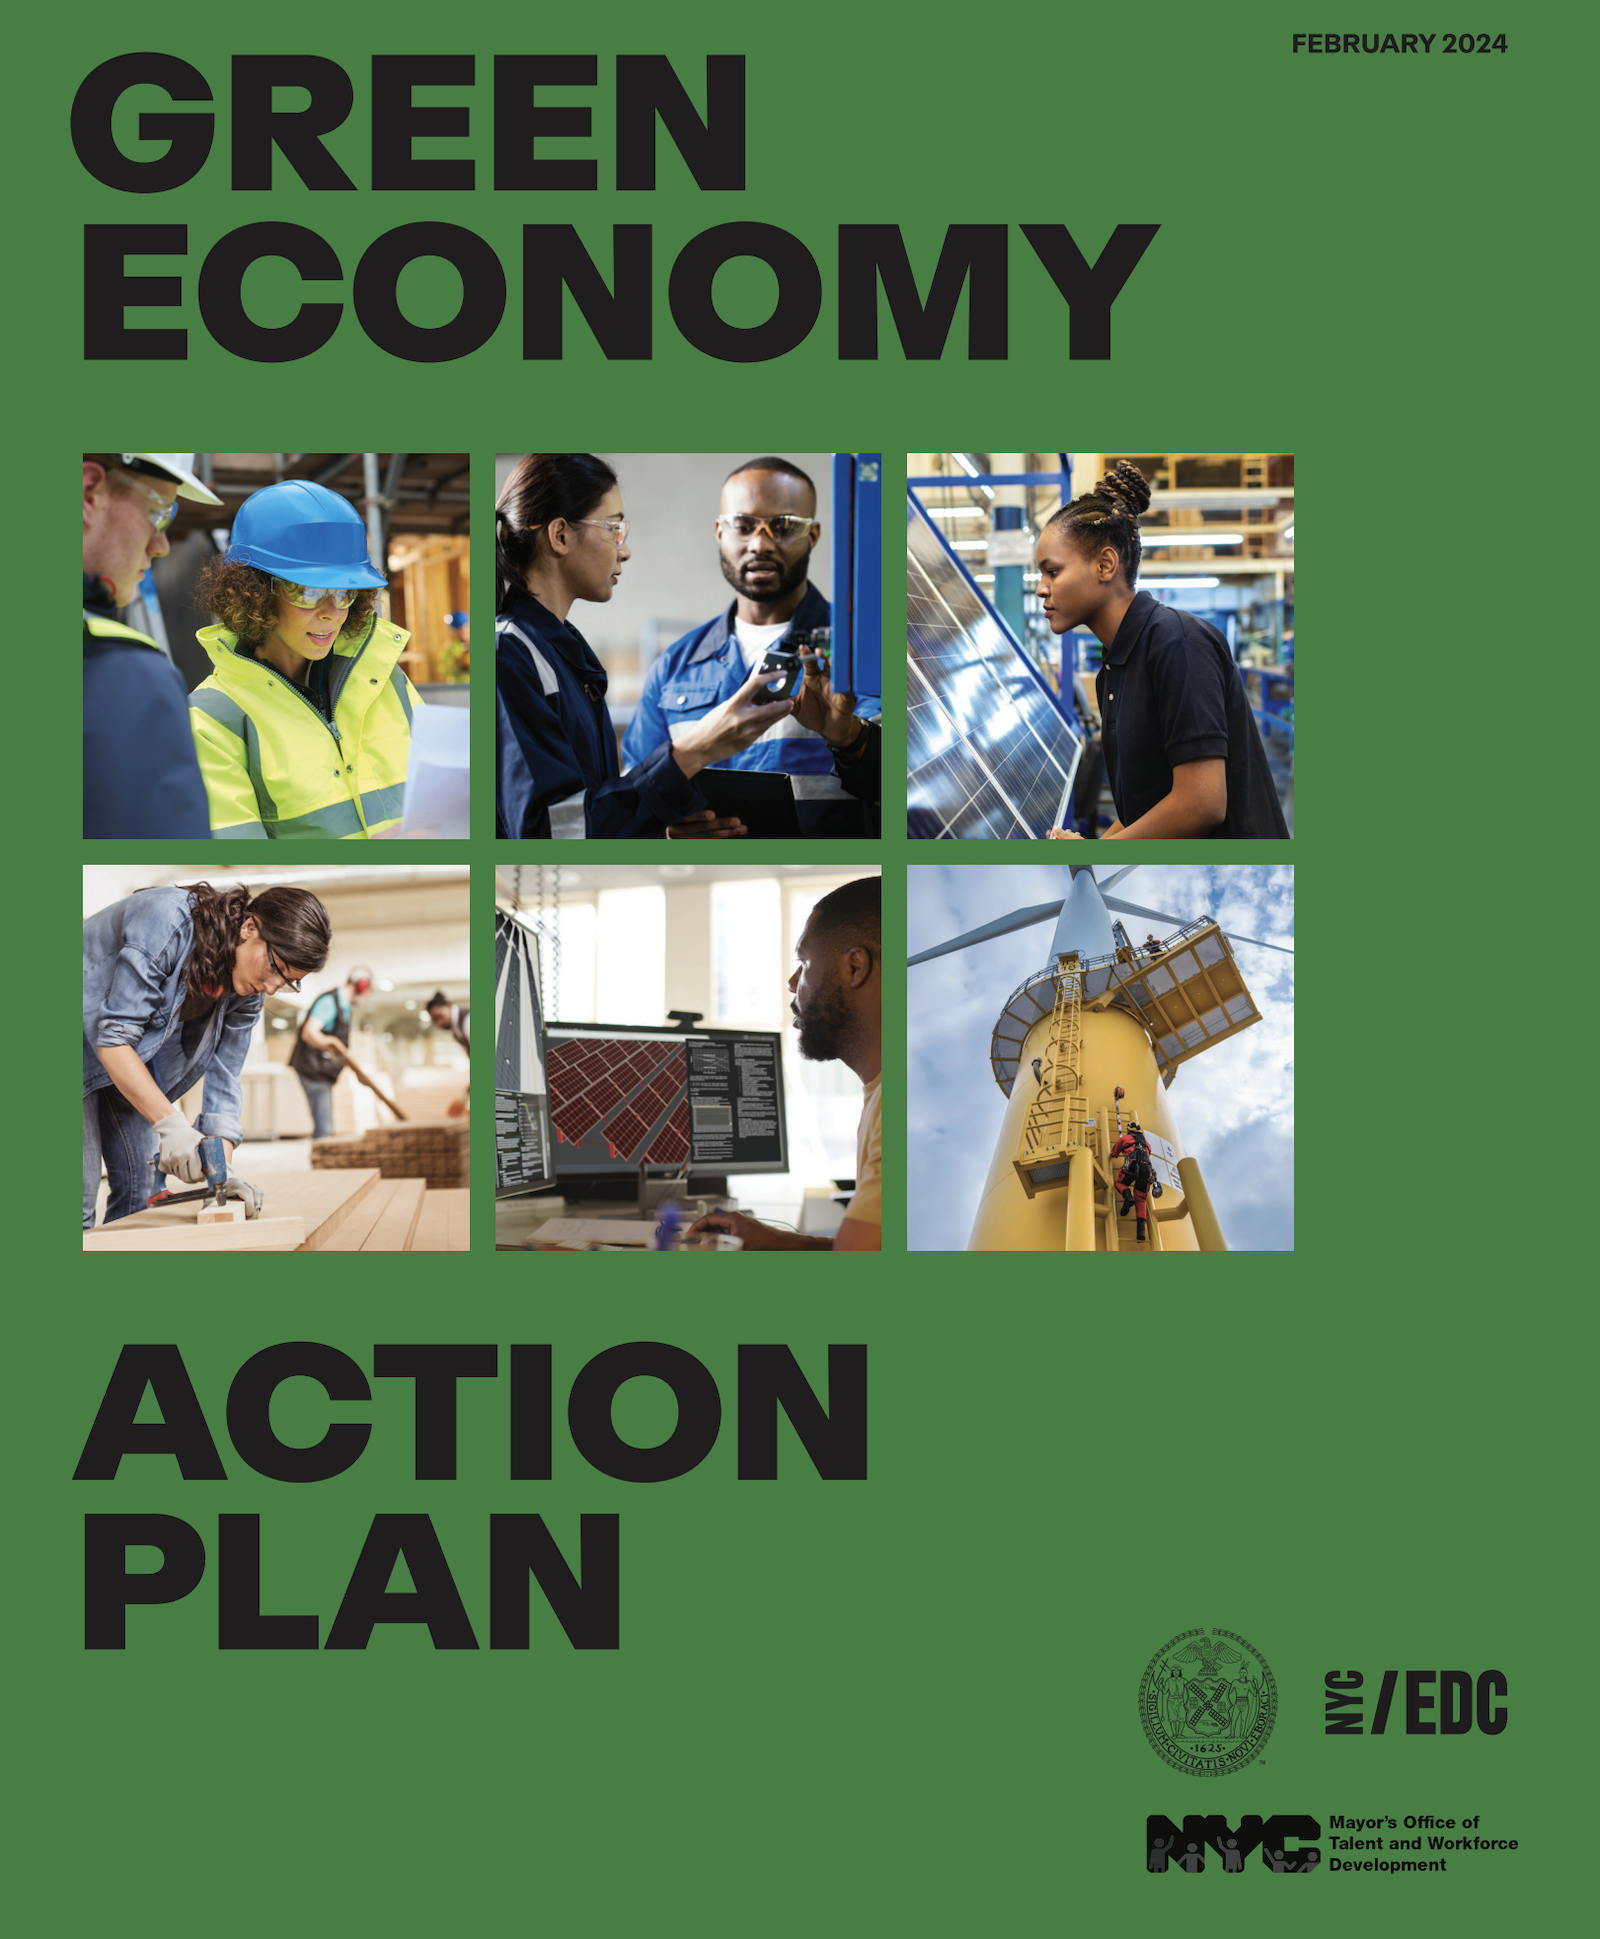 New York City’s Green Economy Action Plan aims for building decarbonization